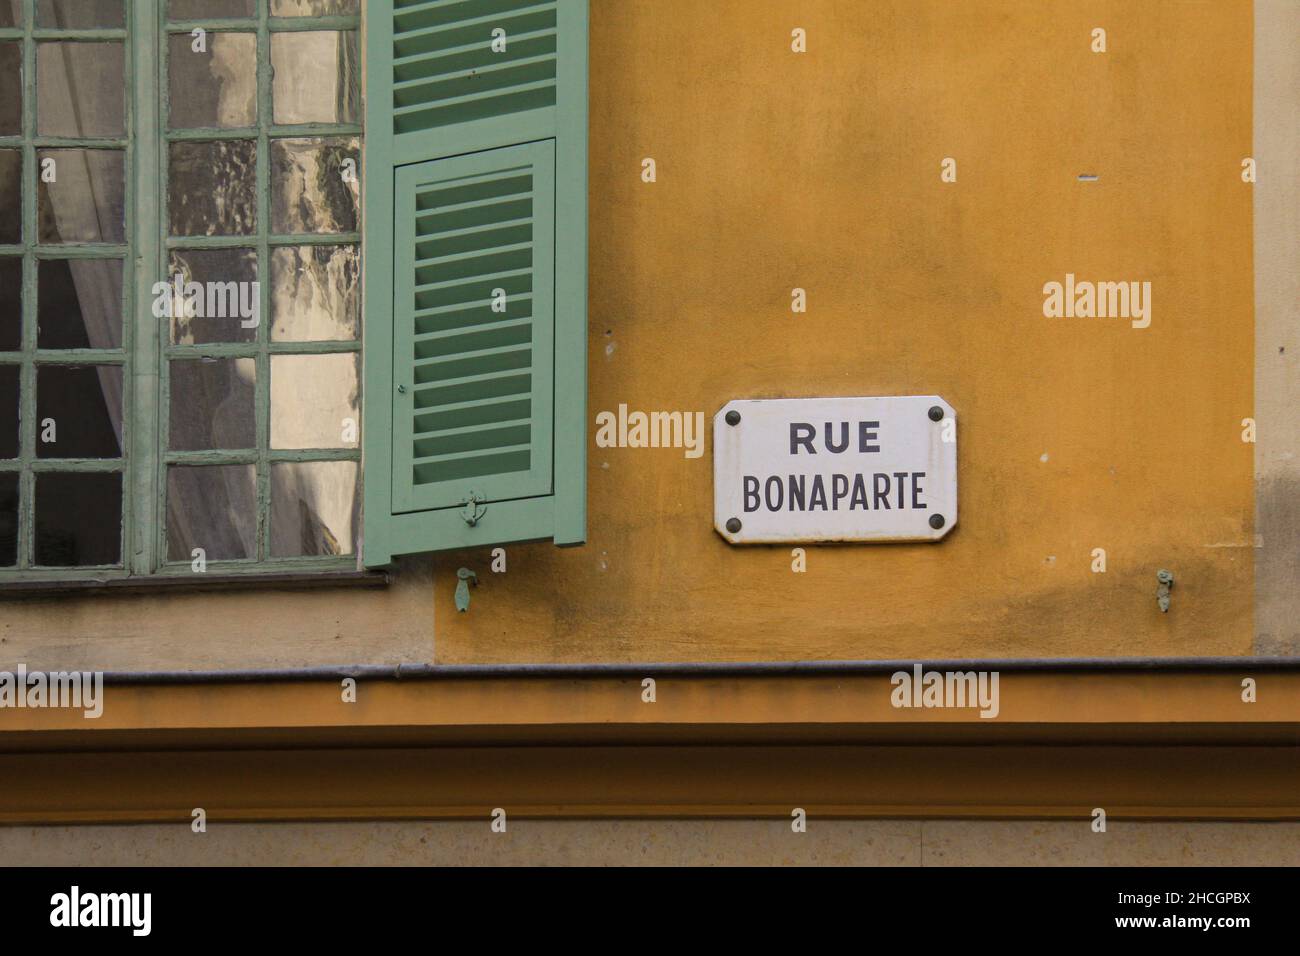 Detail of yellow mediterranean building with green wooden windows and a white street sign saying Rue Bonaparte. Stock Photo